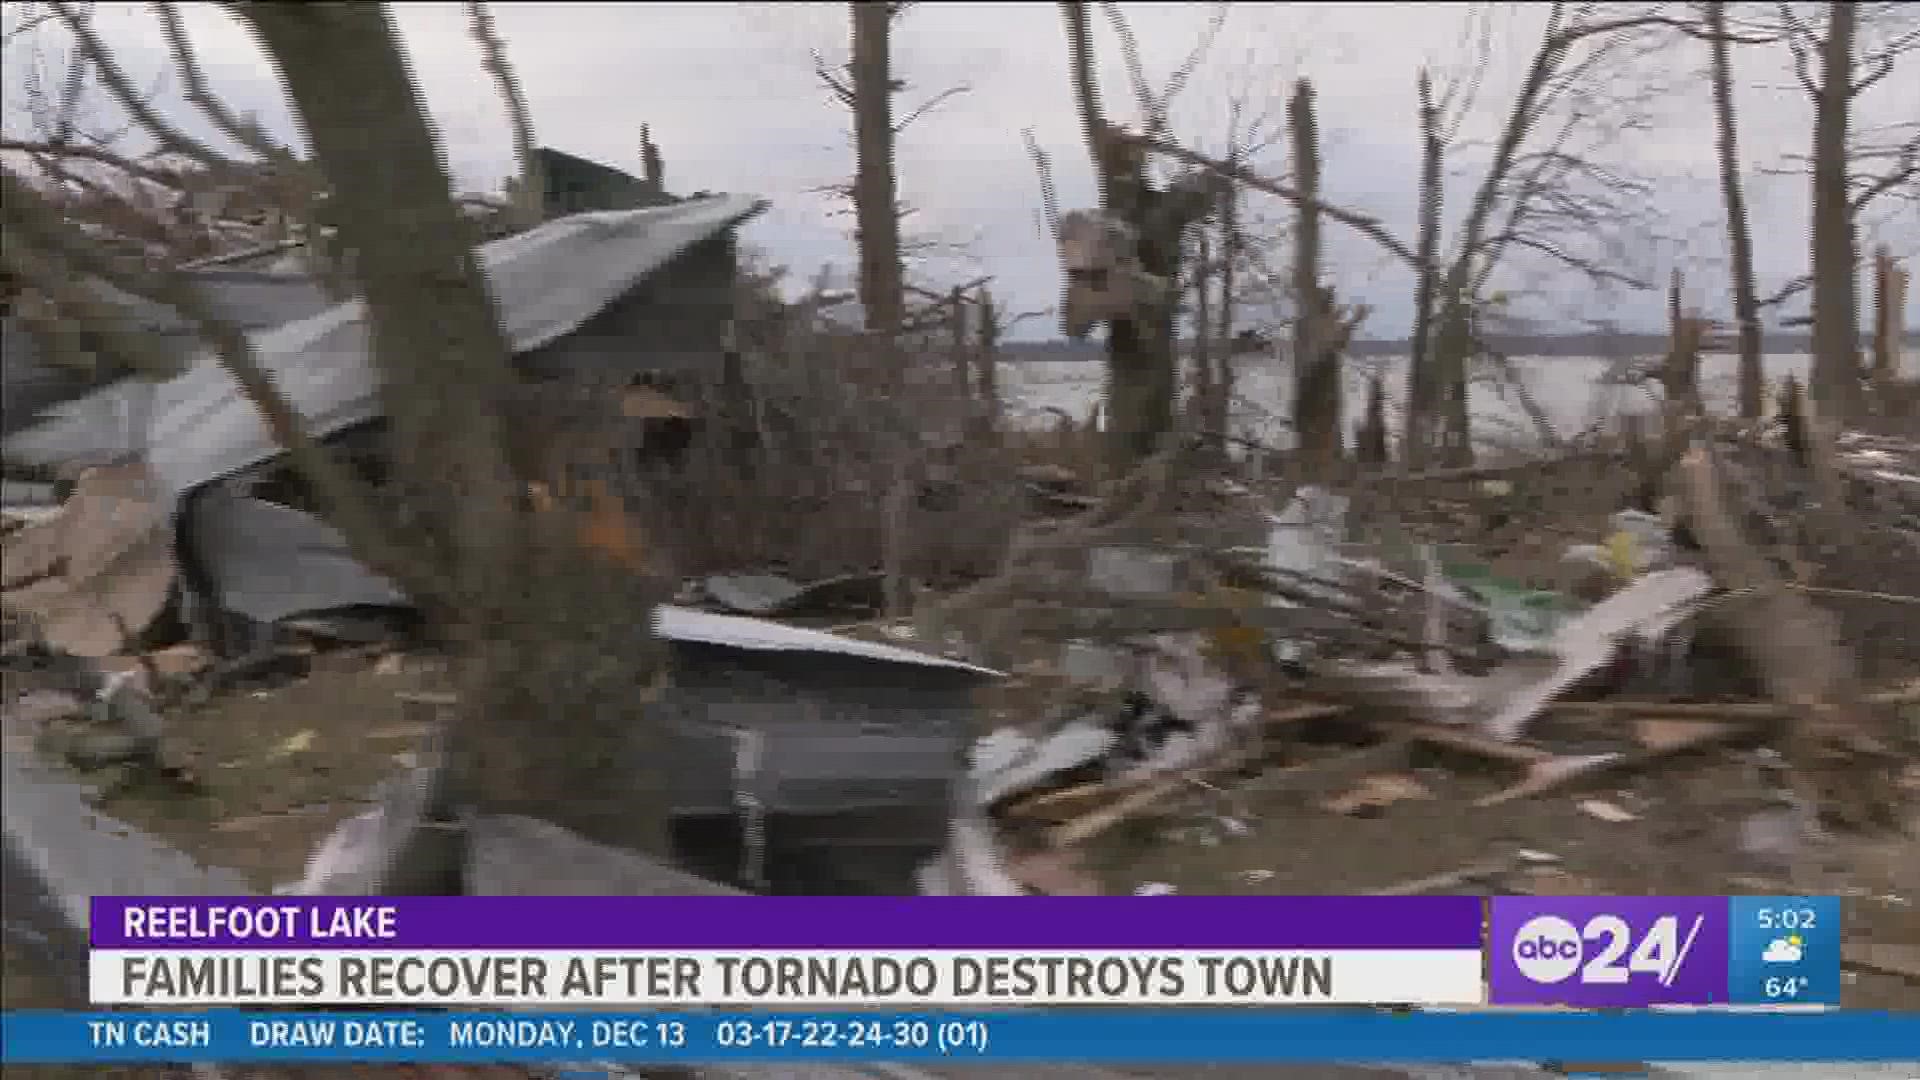 A tornado ripped around Reelfoot Lake in Lake County, Tennessee and destroyed 46 of 50 campers where mainly retirees lived.